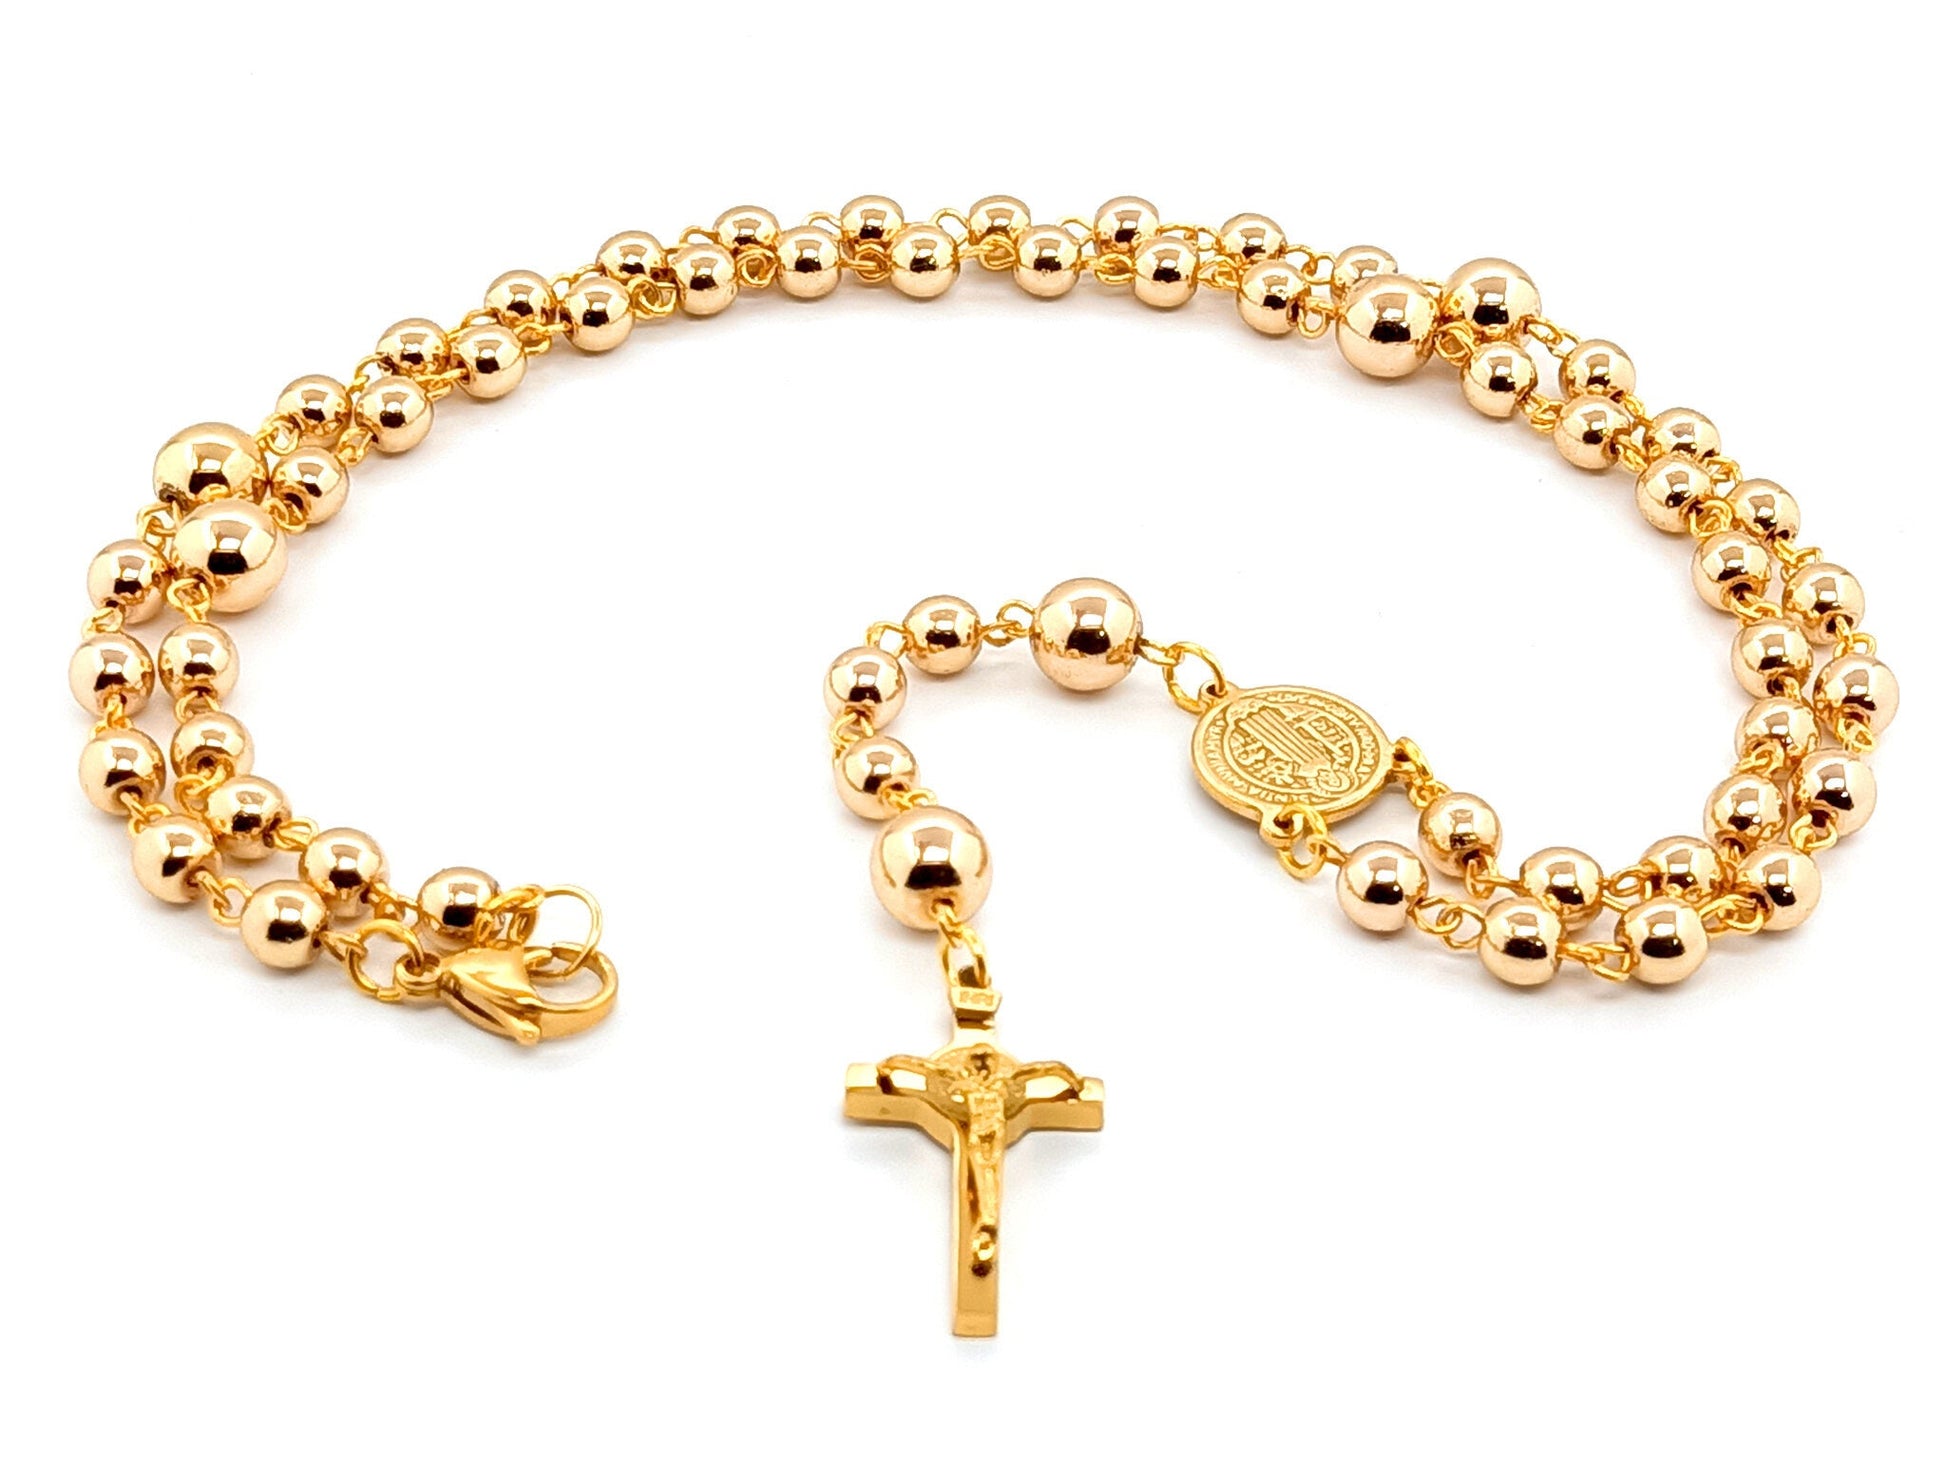 Saint Benedict unique rosary beads  necklace with gold hematite beads and stainless steel gold plated Saint Benedict crucifix.